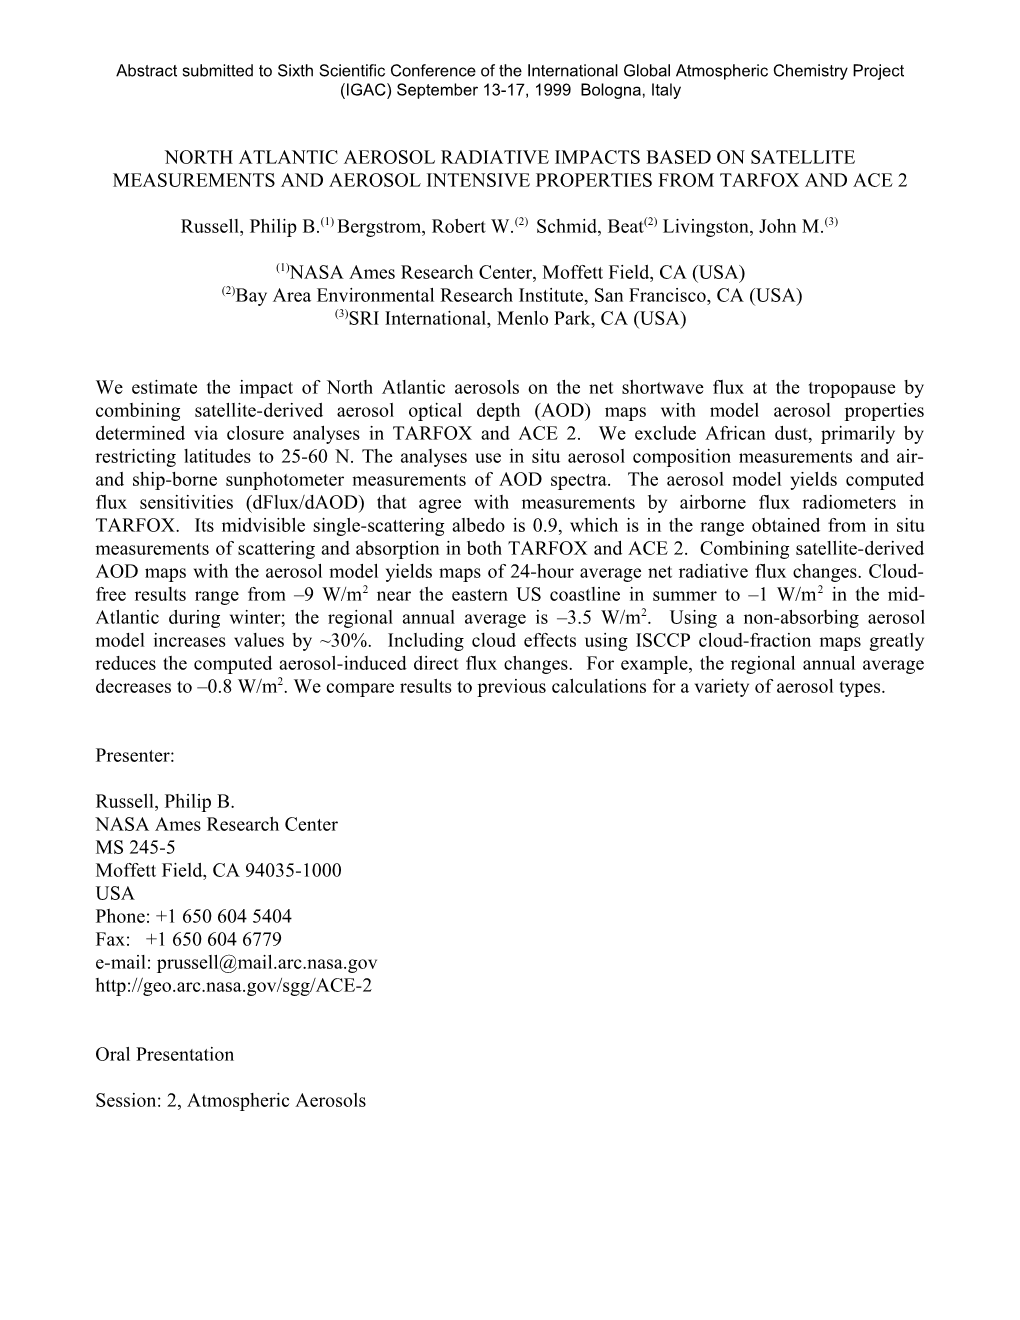 Clear Sky Closure Studies of Lower Tropospheric Aerosol and Water Vapor During ACE-2 Using